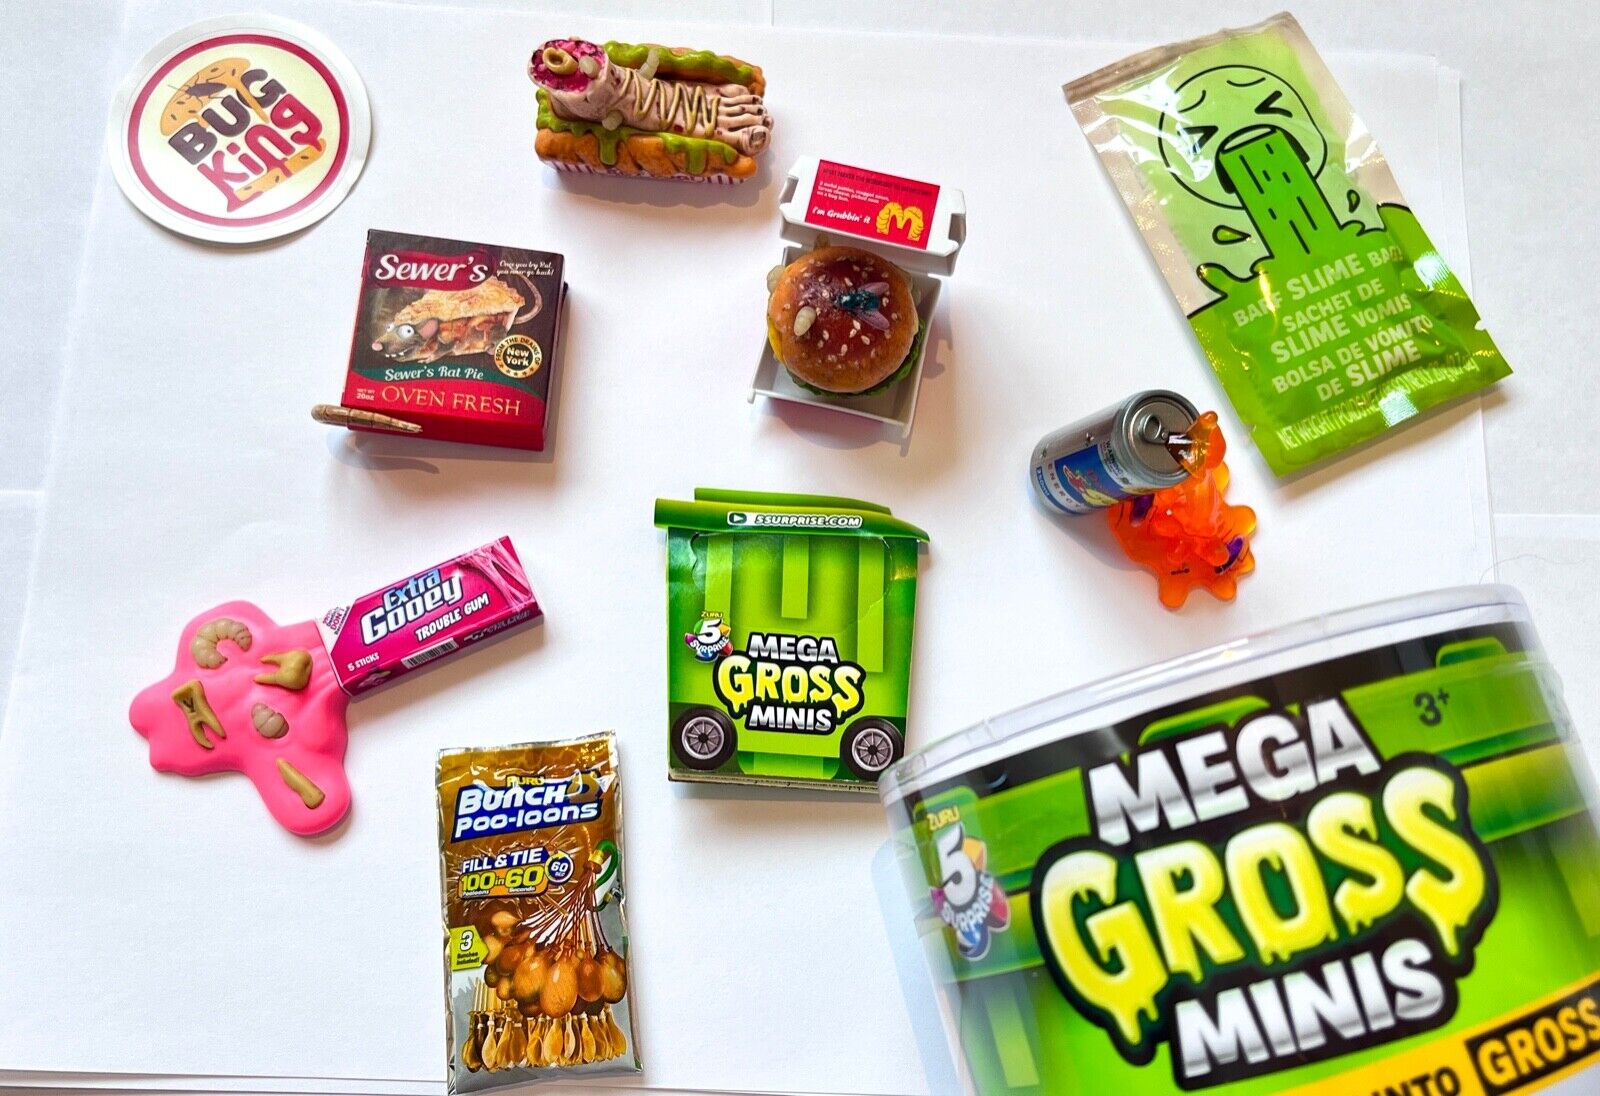 More Mega Gross Minis to open! We are amazed by how detailed the gross